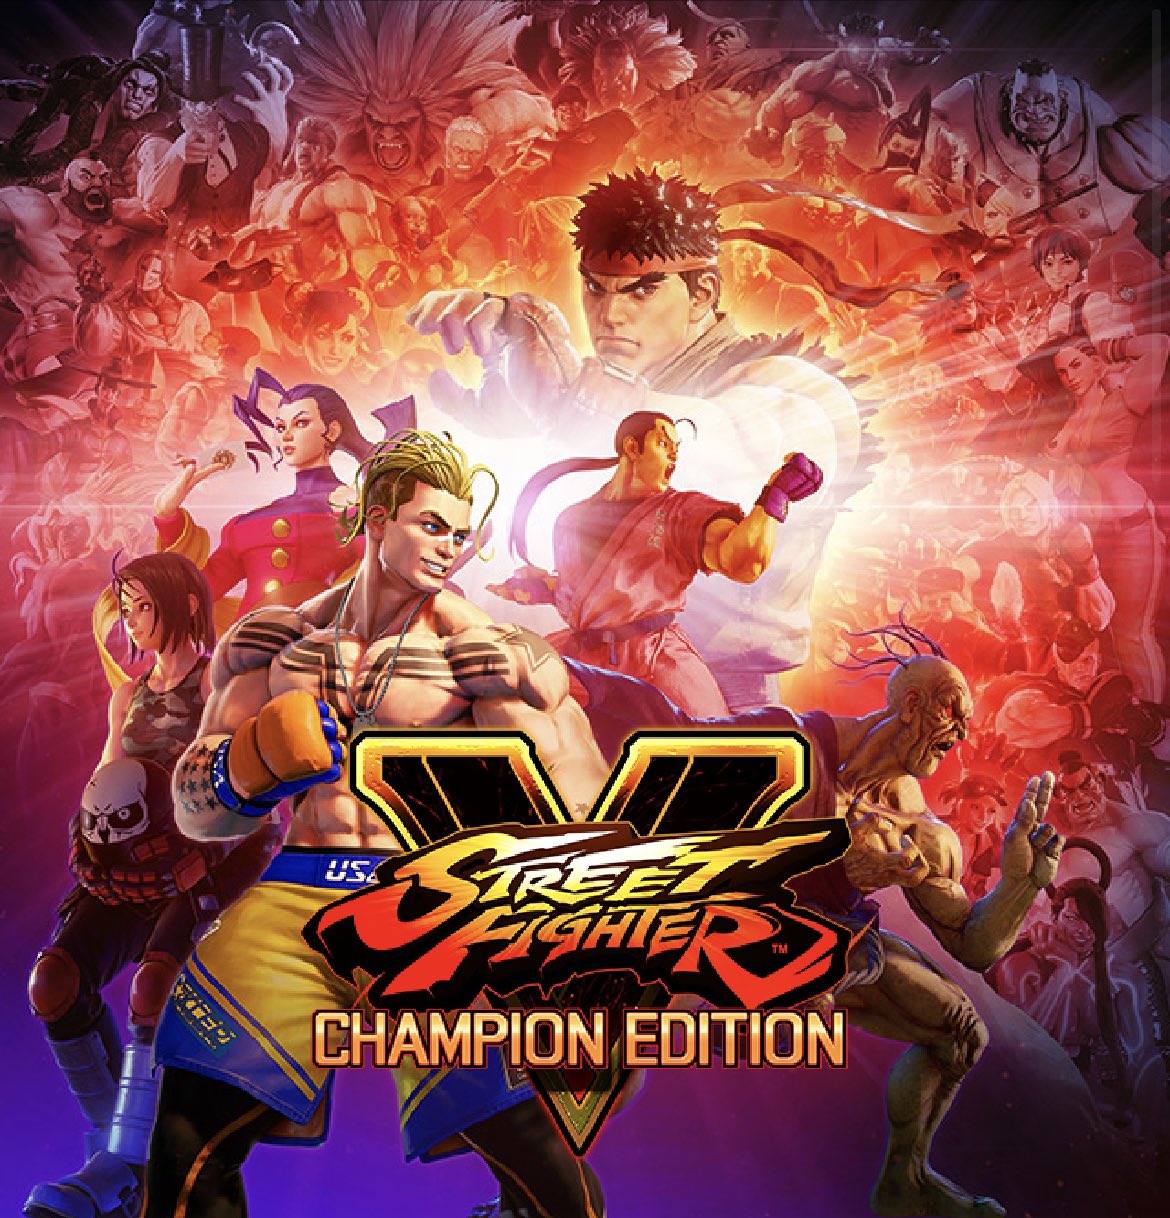 Street Fighter V Reaches 6 Million Sales Worldwide, New Edition with All  Characters DLC Announced for Japan